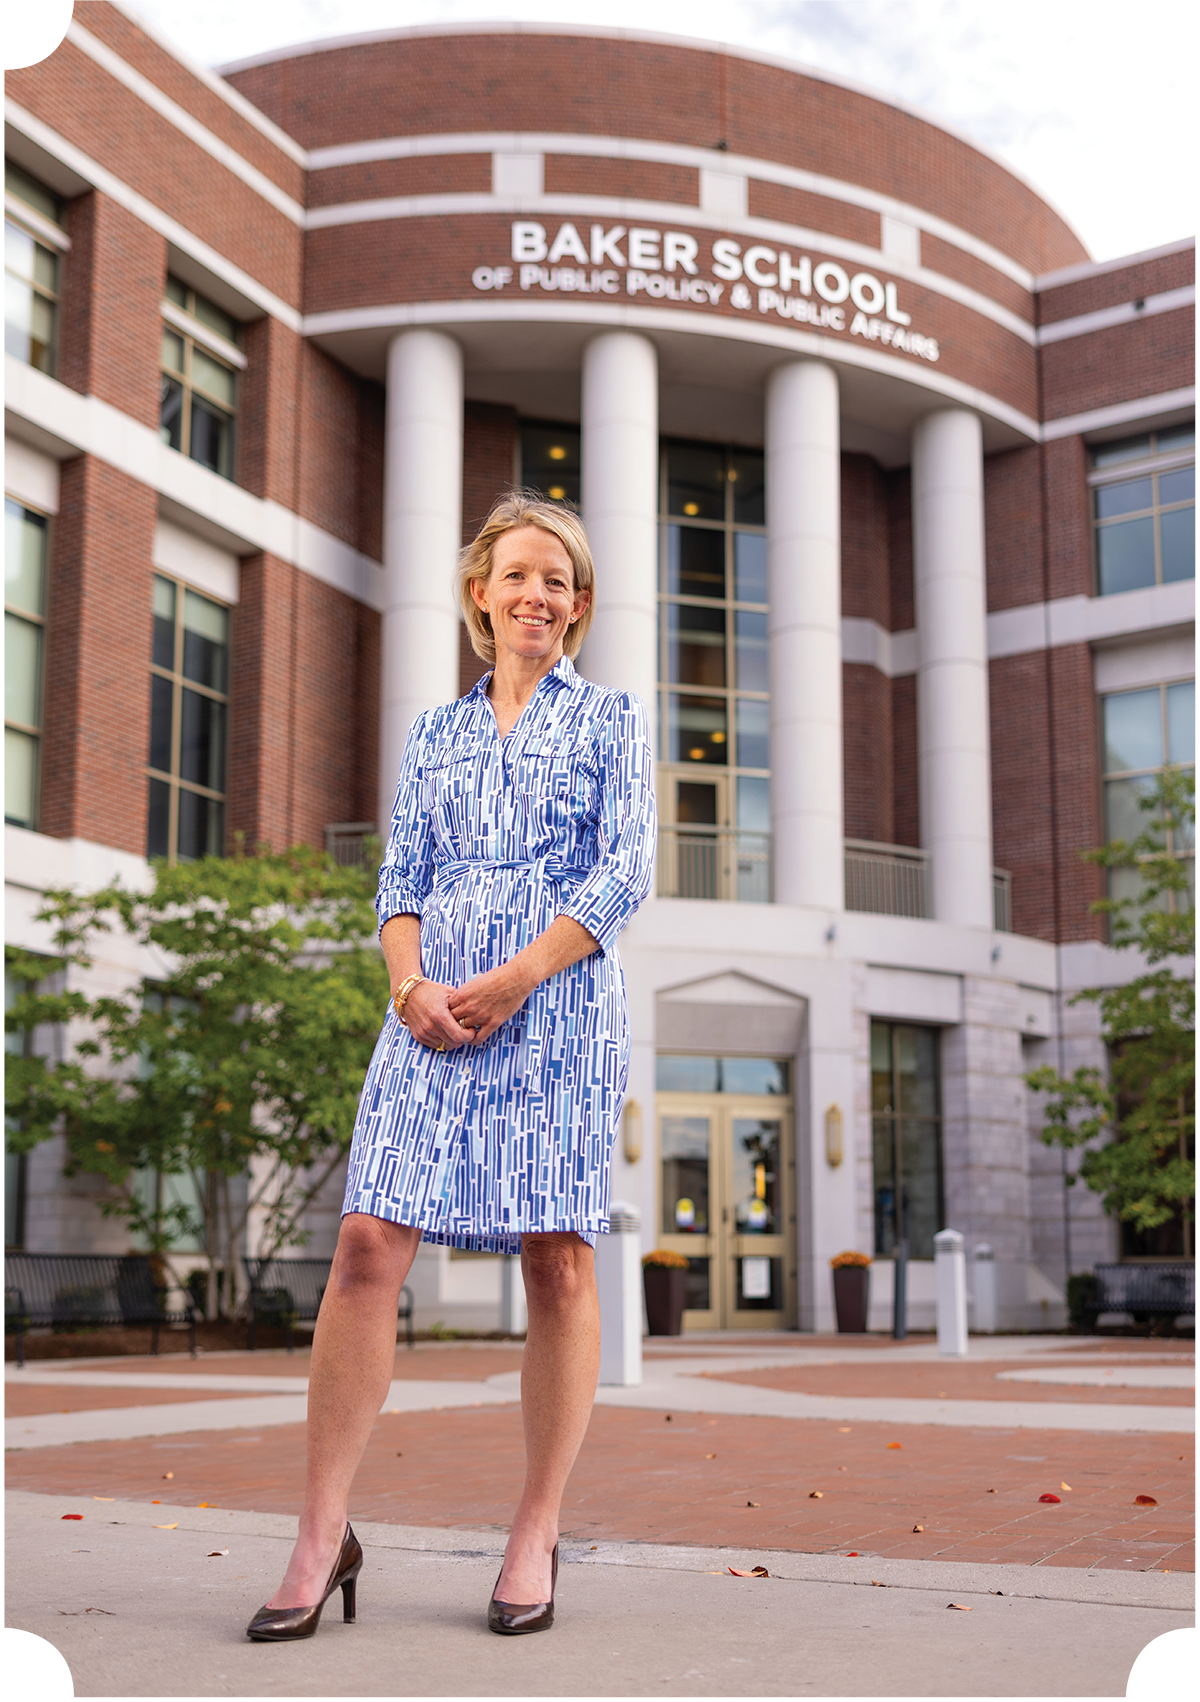 Marianne Wanamaker stands outside the Baker School of Public Policy and Public Affairs